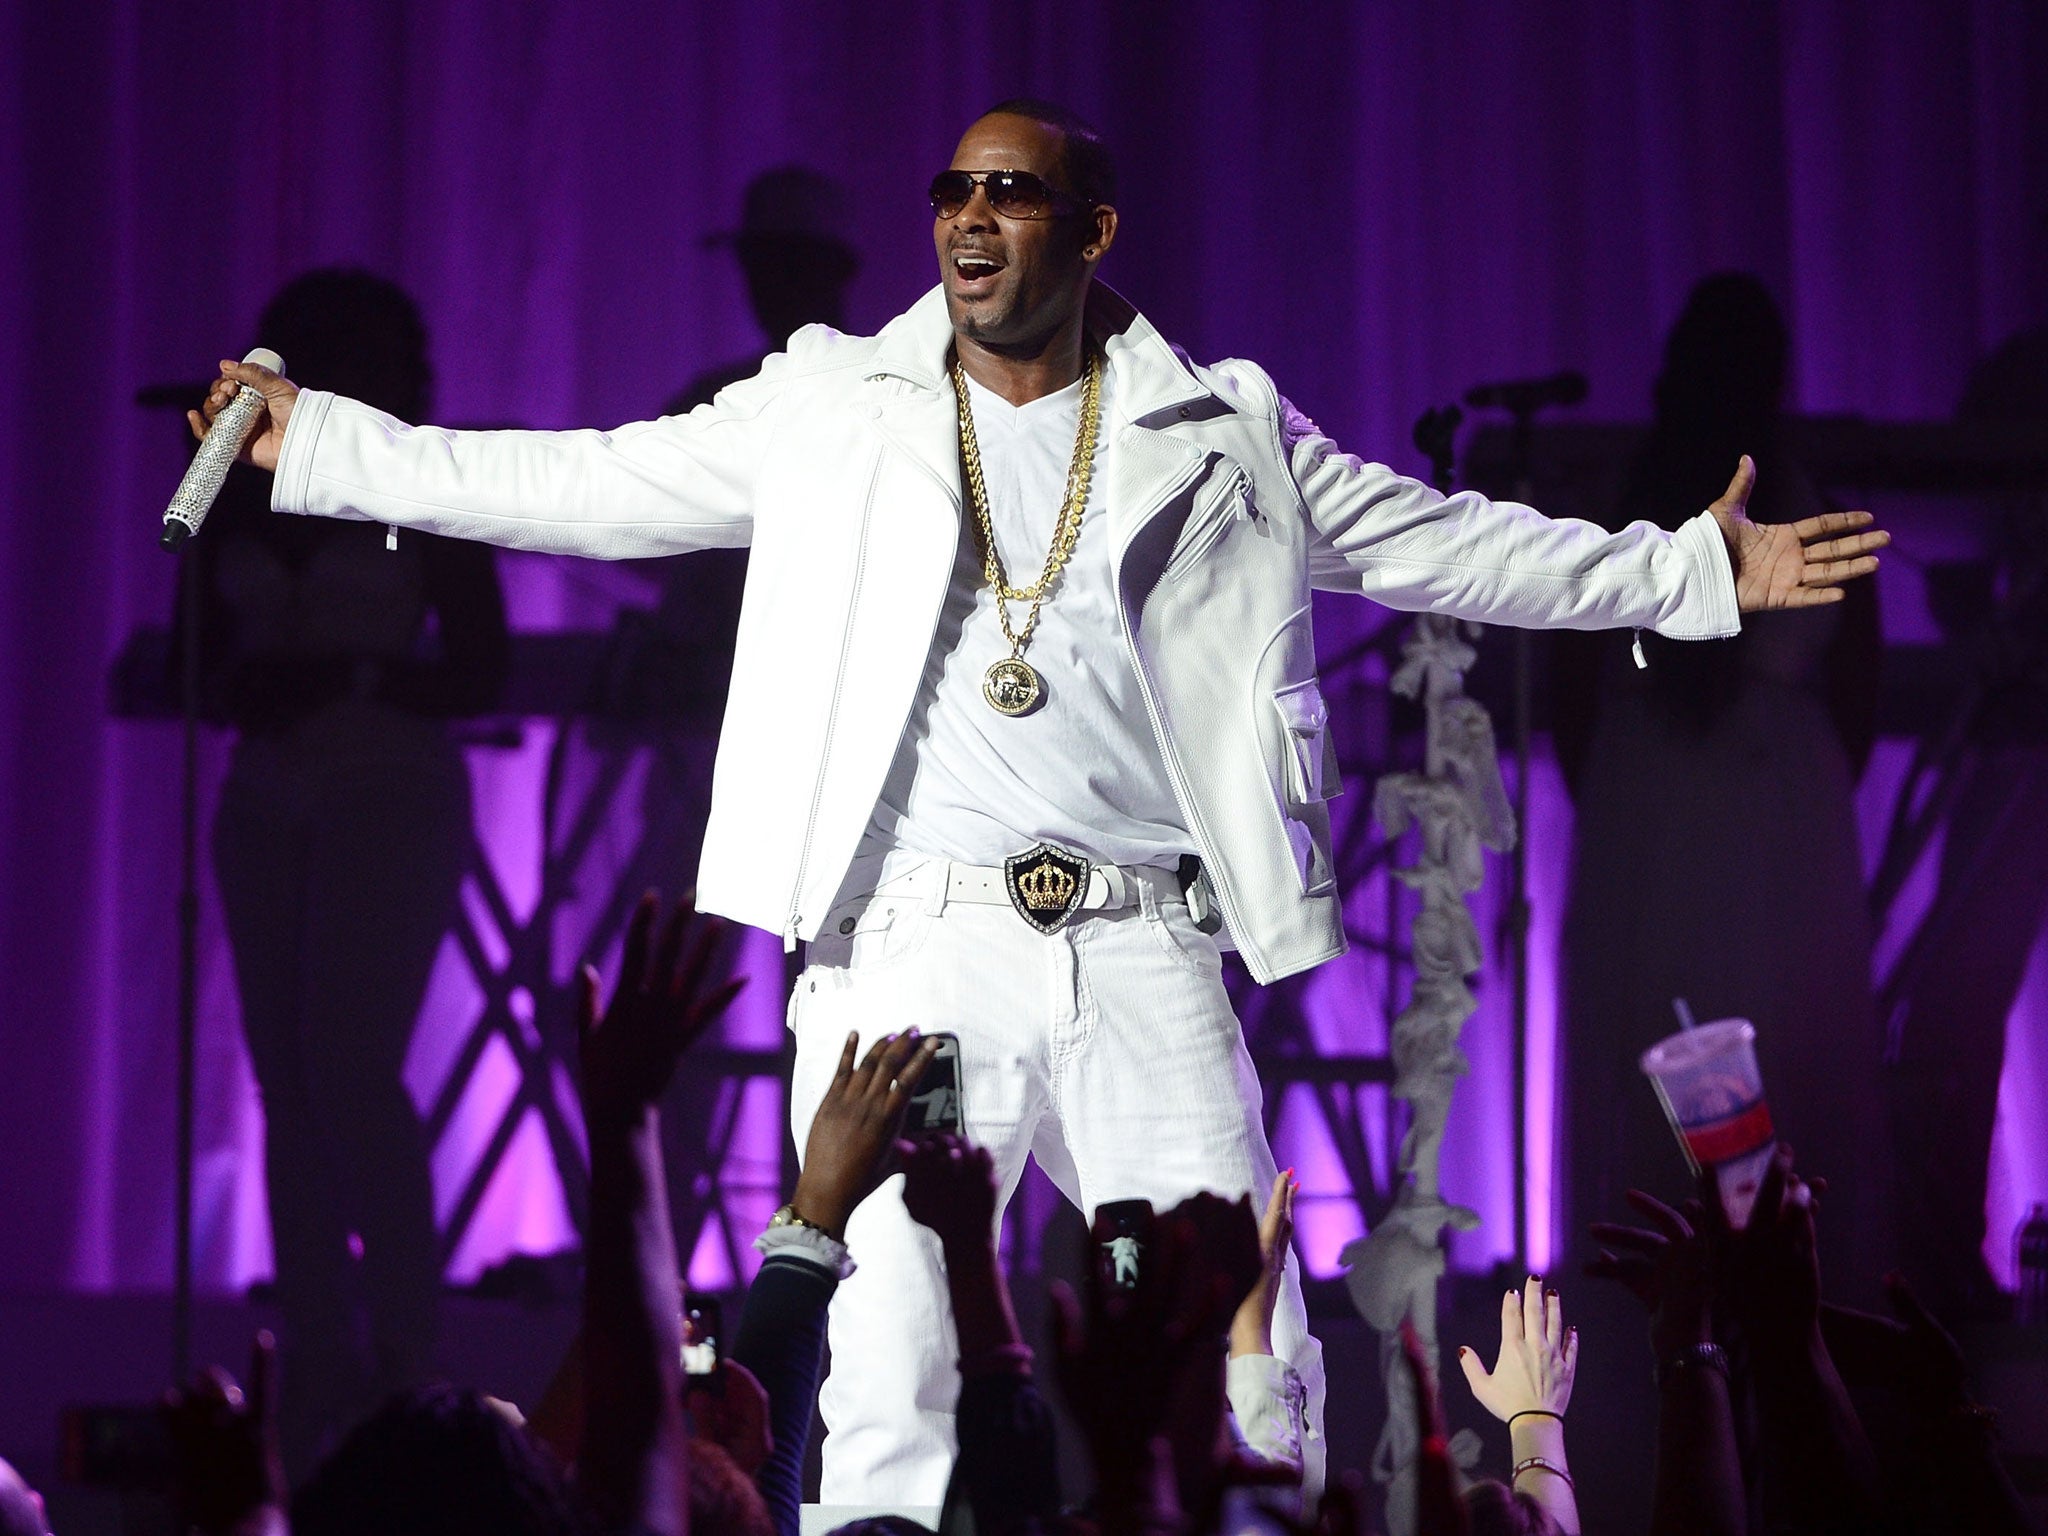 R Kelly has been experimenting with different genres for his new album